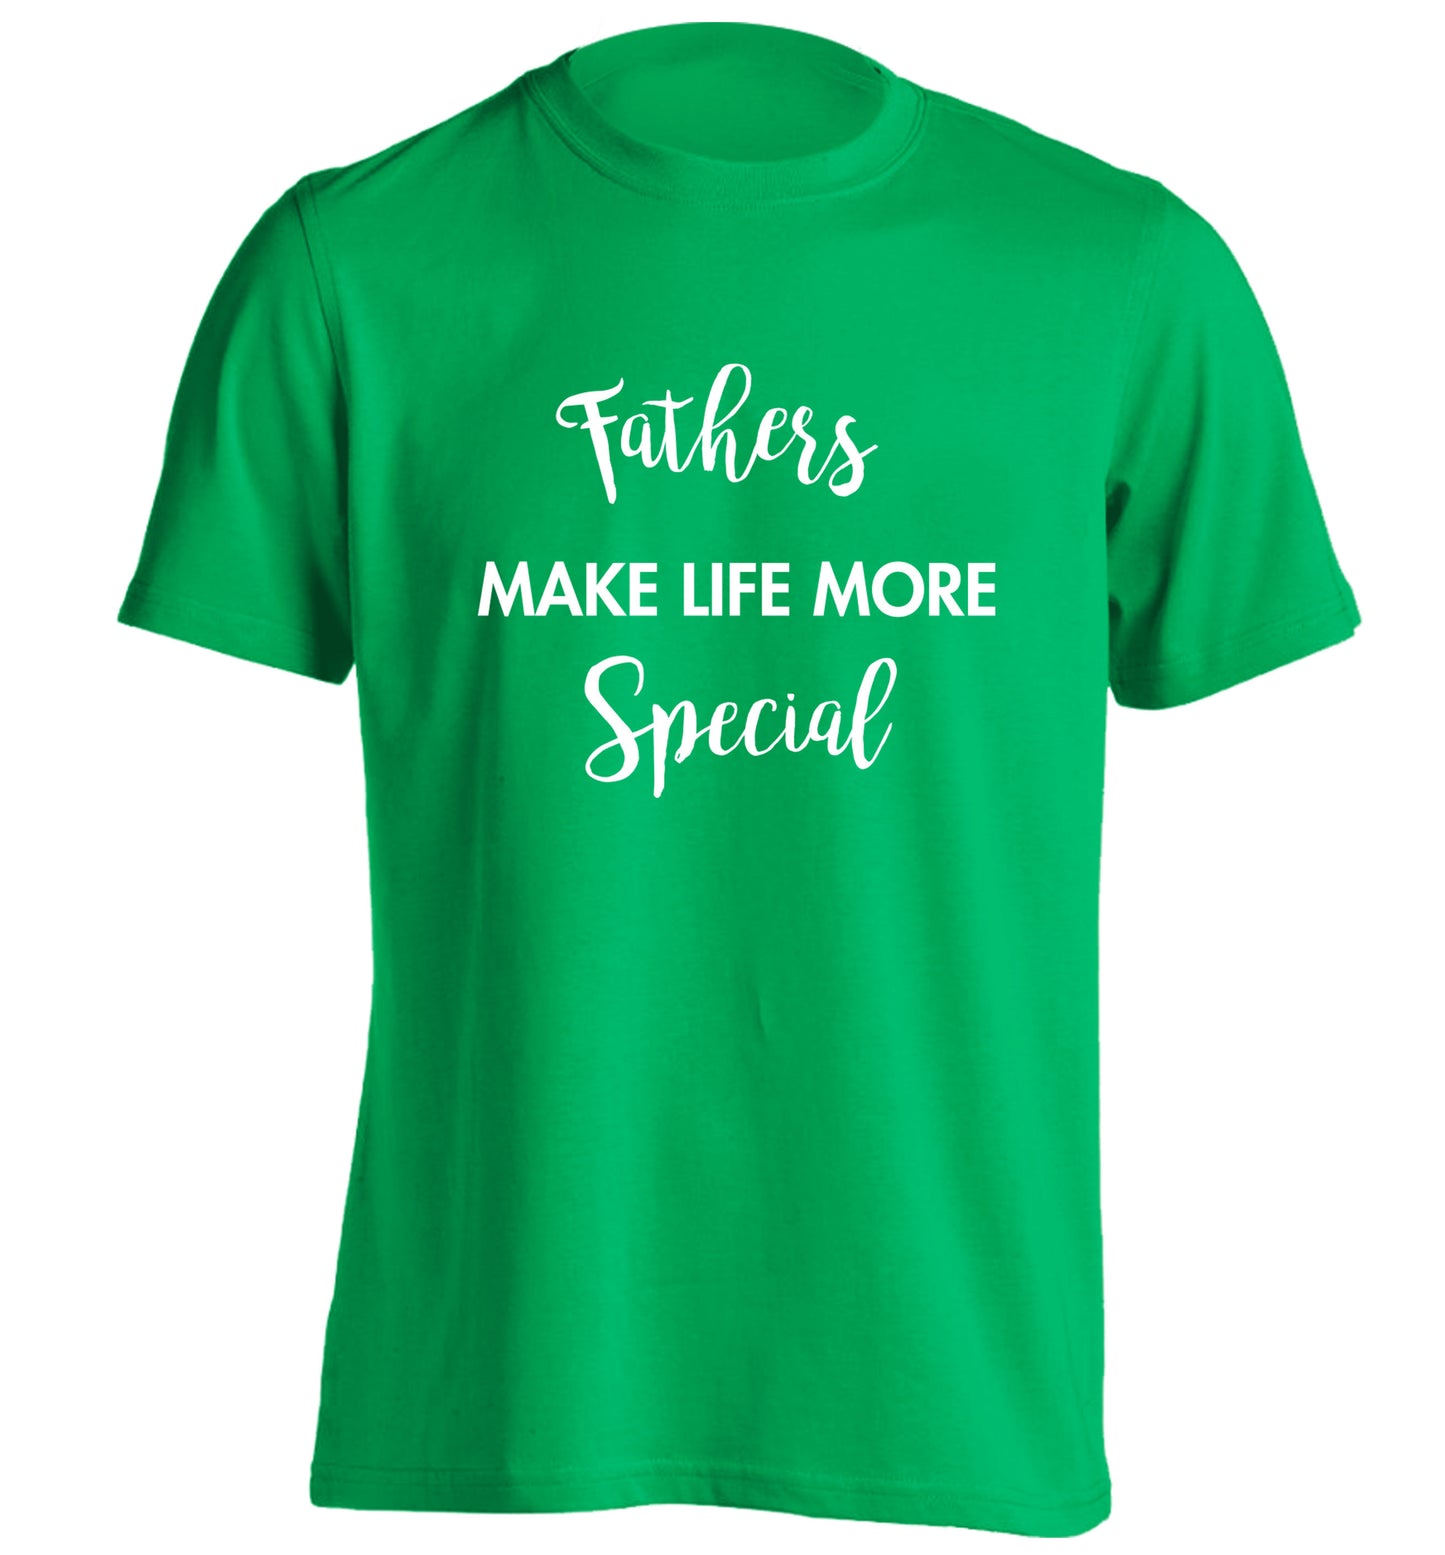 Fathers make life more special adults unisex green Tshirt 2XL